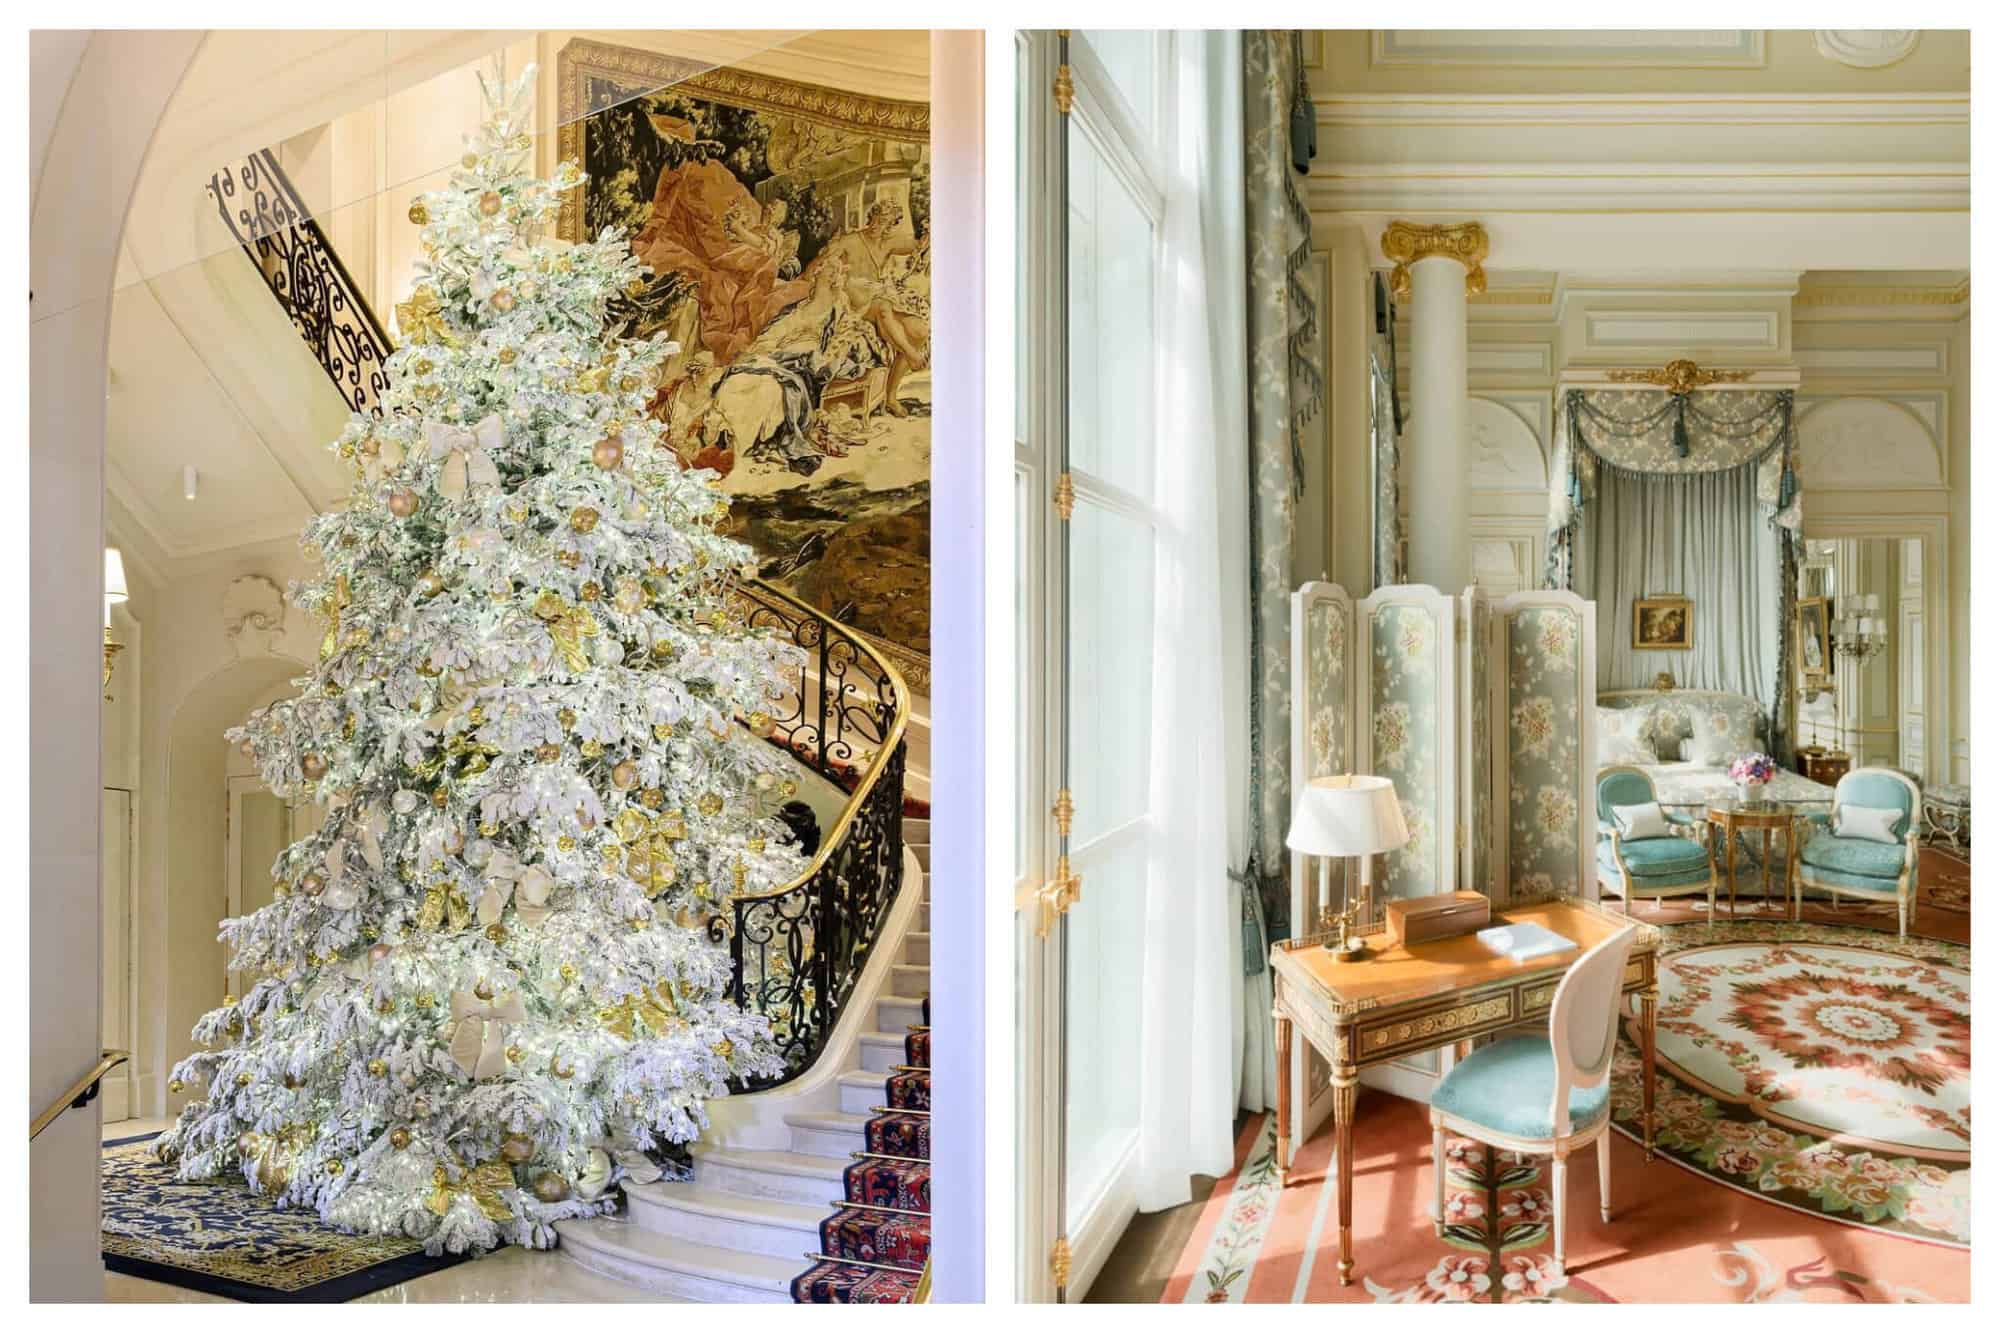 Left a photo of the Christmas tree at the Ritz hotel in Paris. Right: a photo of a bedroom at the Ritz Hotel in Paris 